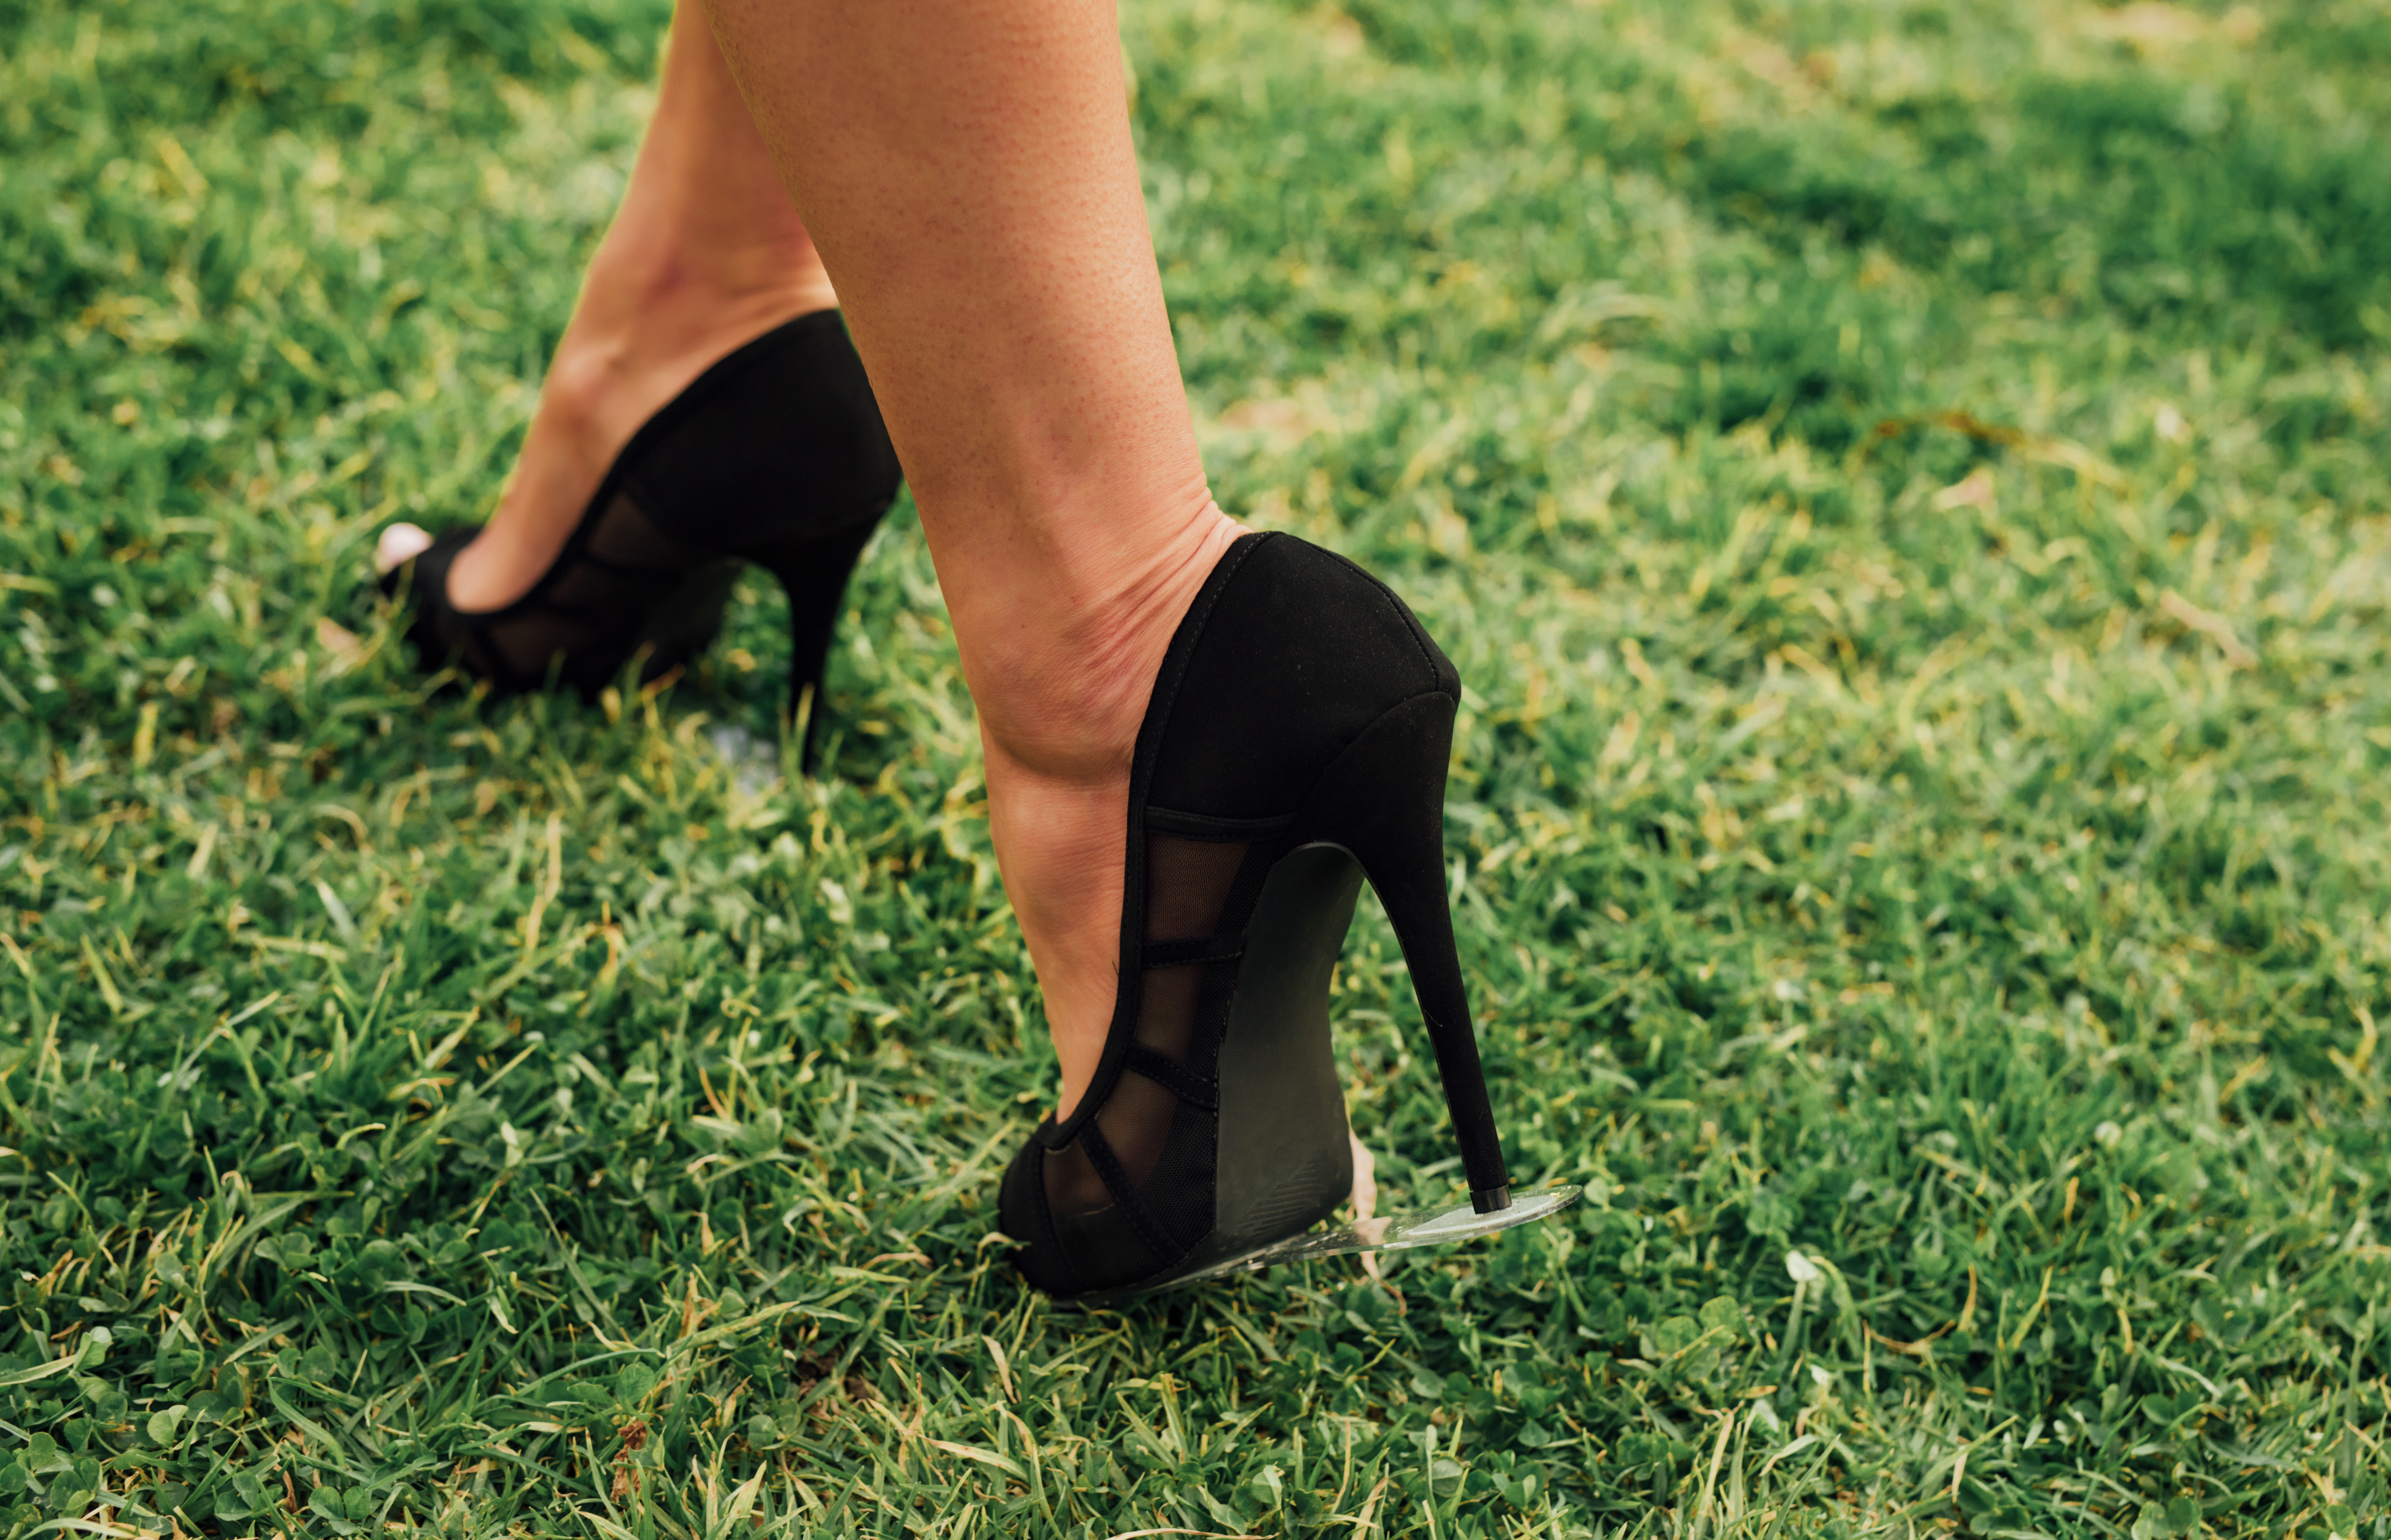 covers for heels on grass